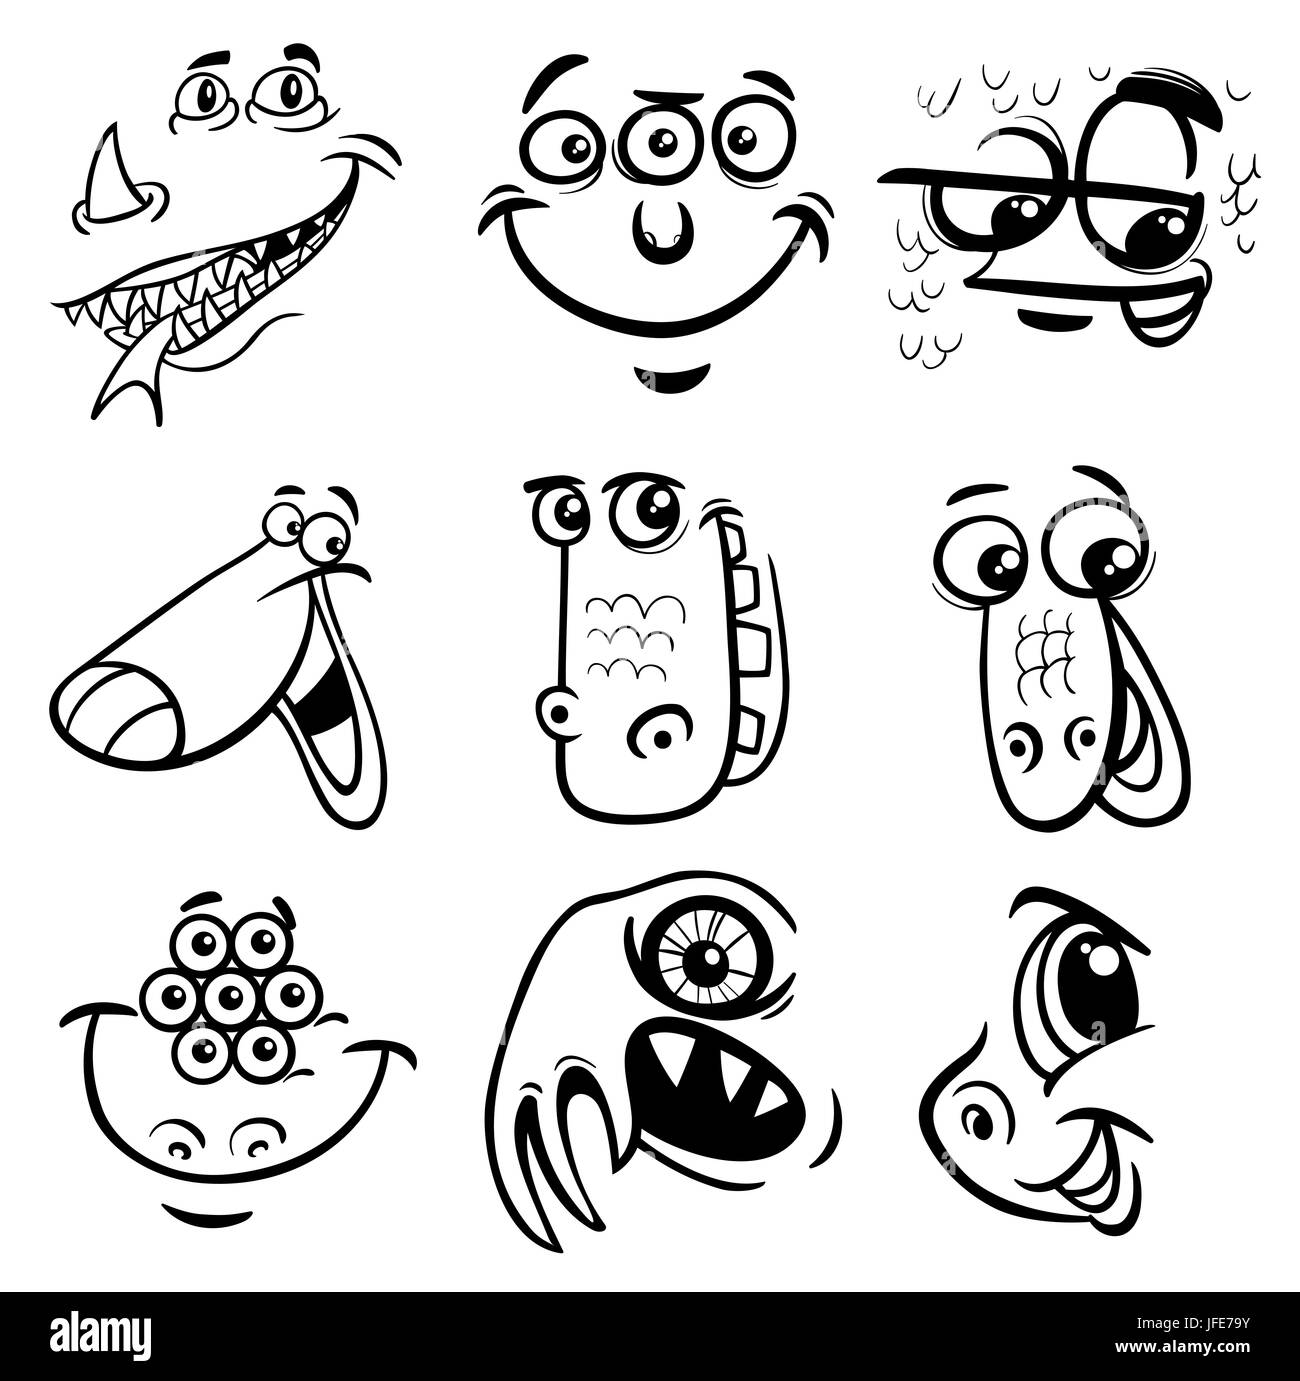 black and white cartoon monsters Stock Photo